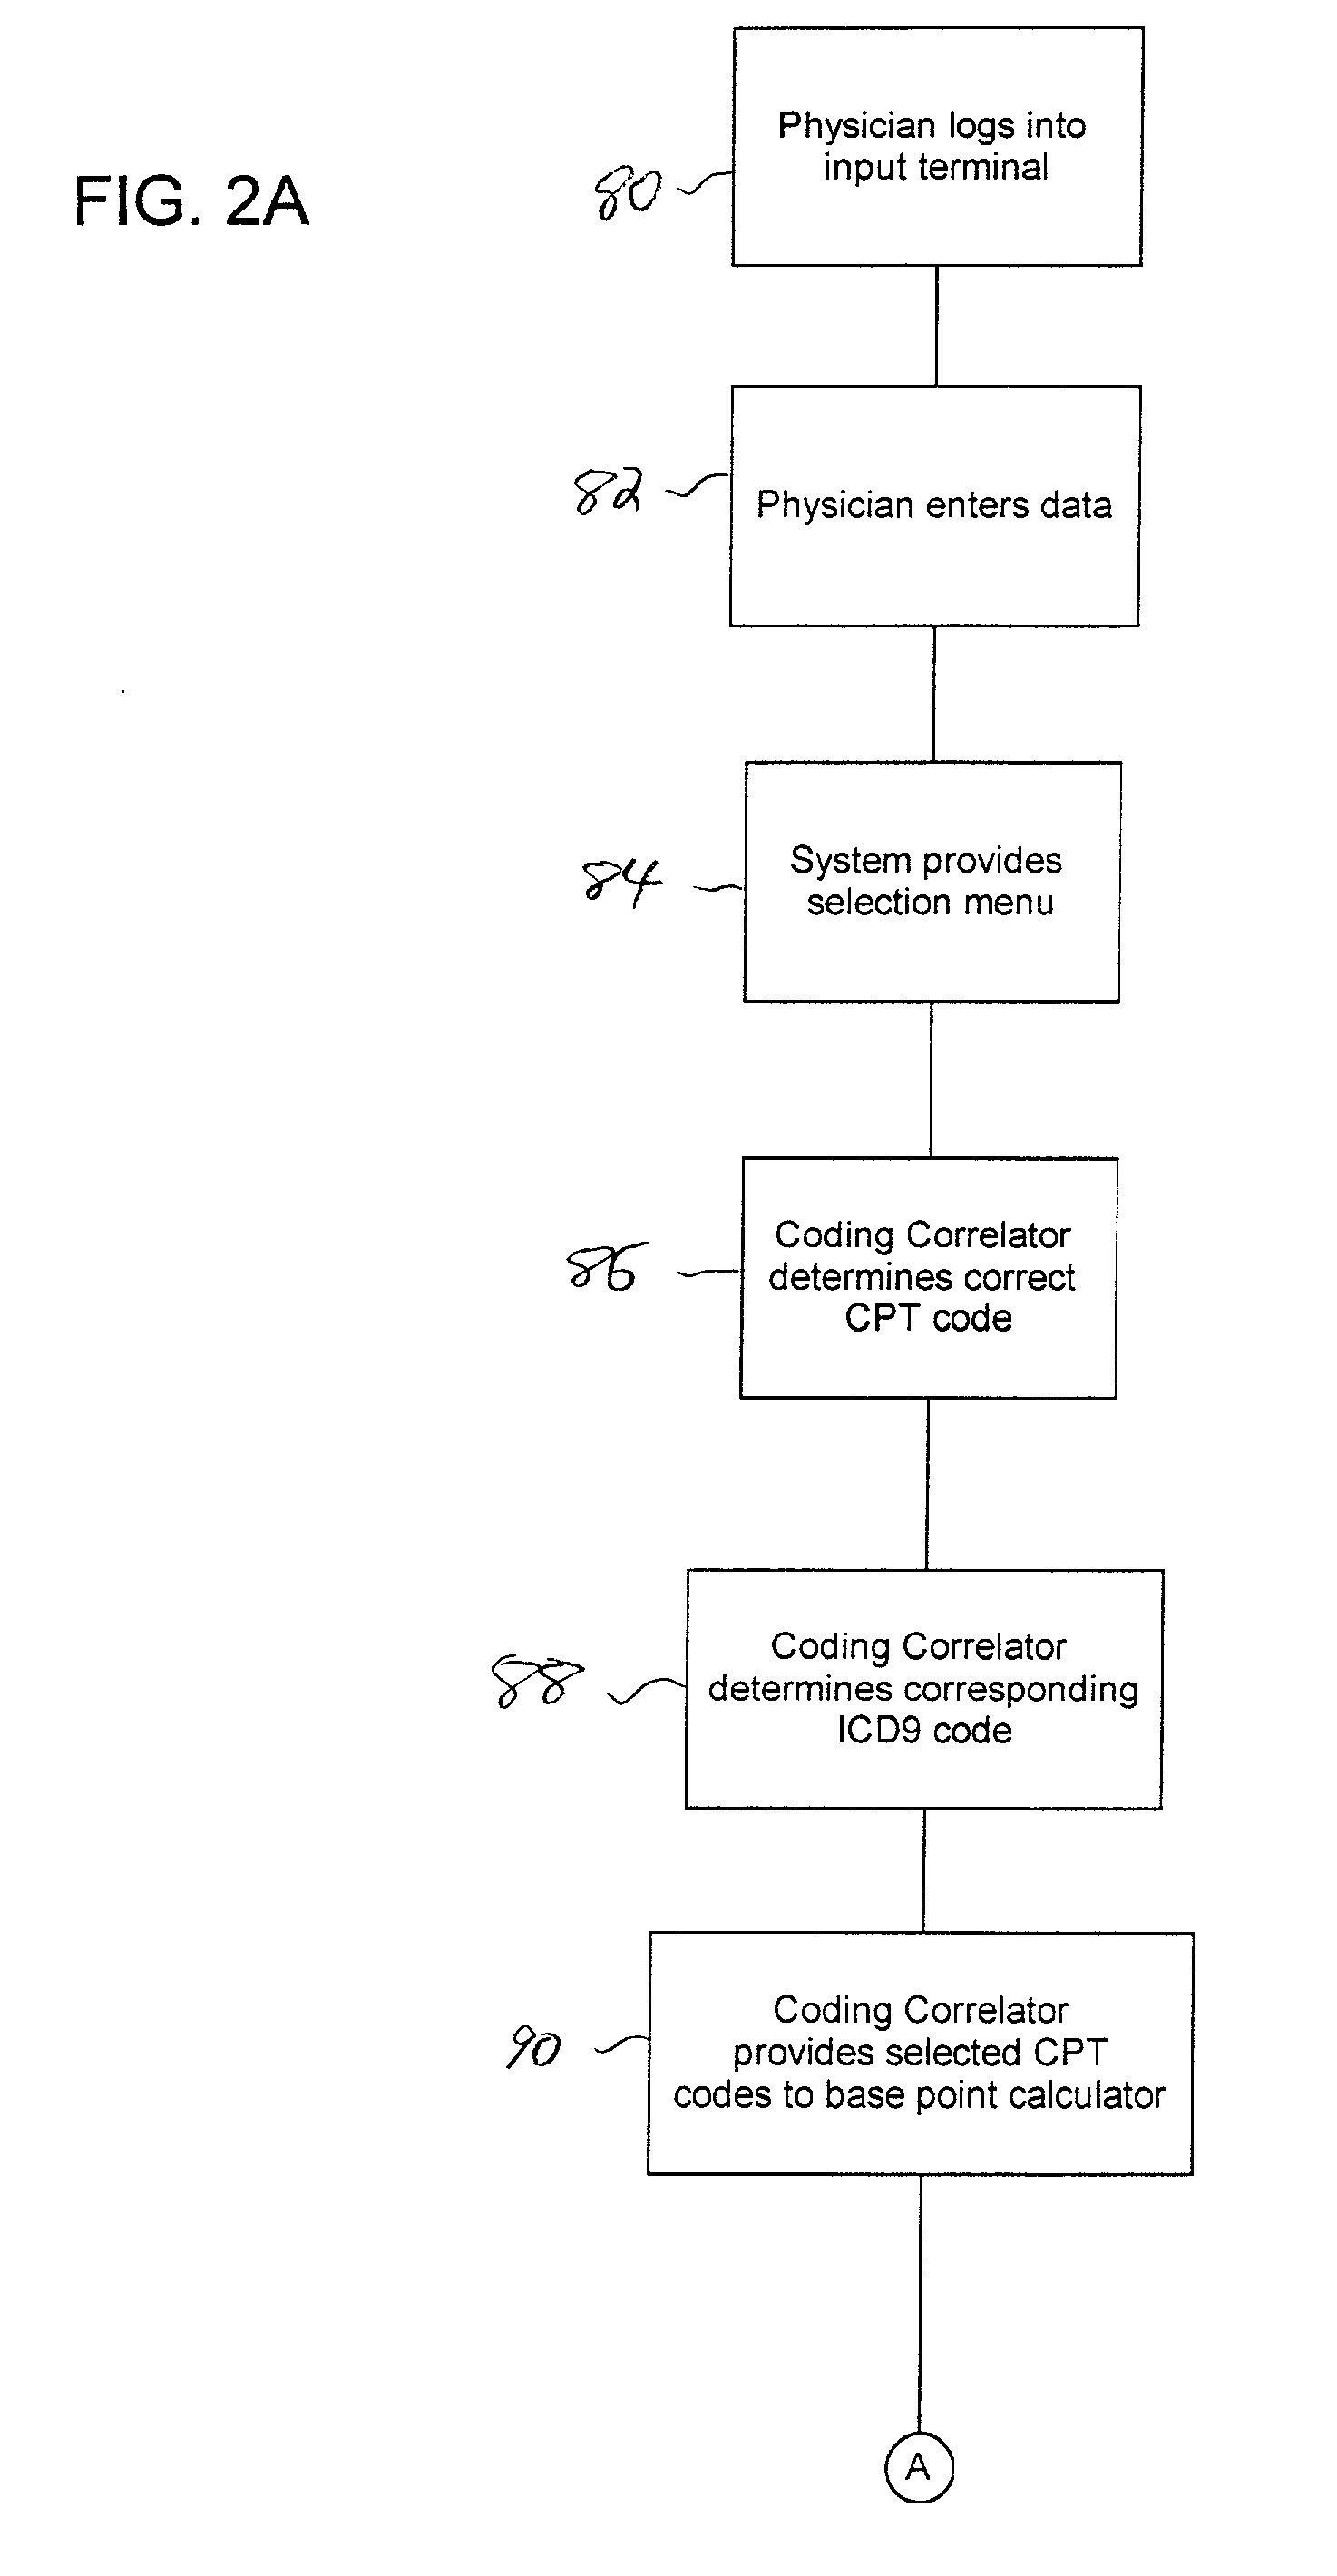 System and method for determining and reporting data codes for medical billing to a third party payer